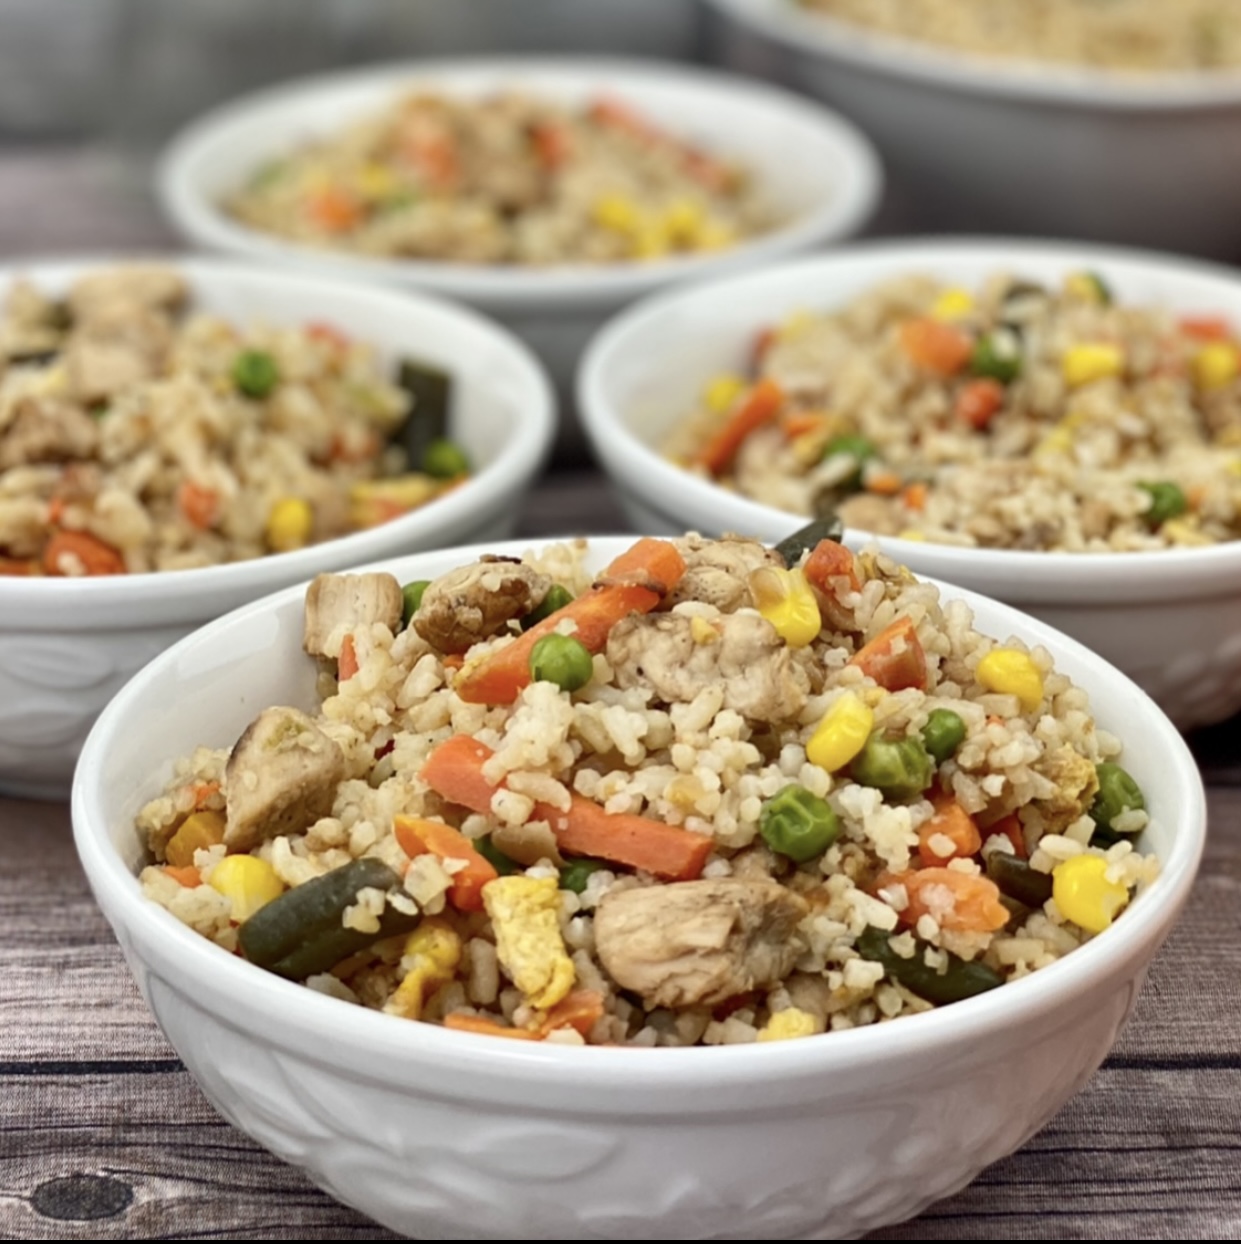 Chicken Fried Rice, 20 oz at Whole Foods Market